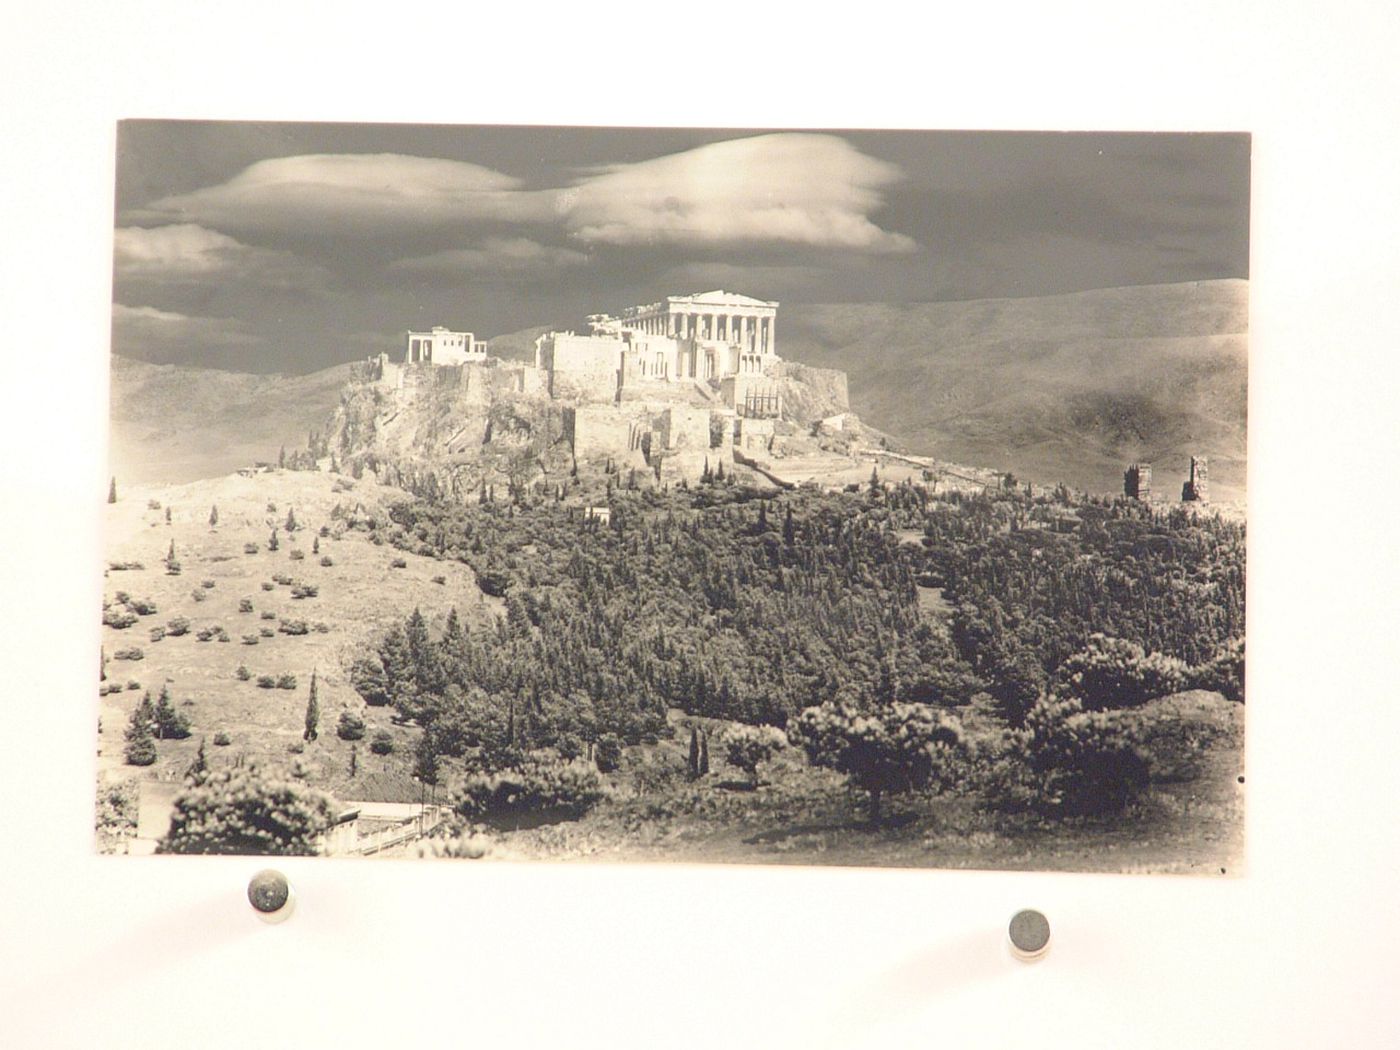 Acropolis from northwest [?], Athens, Greece